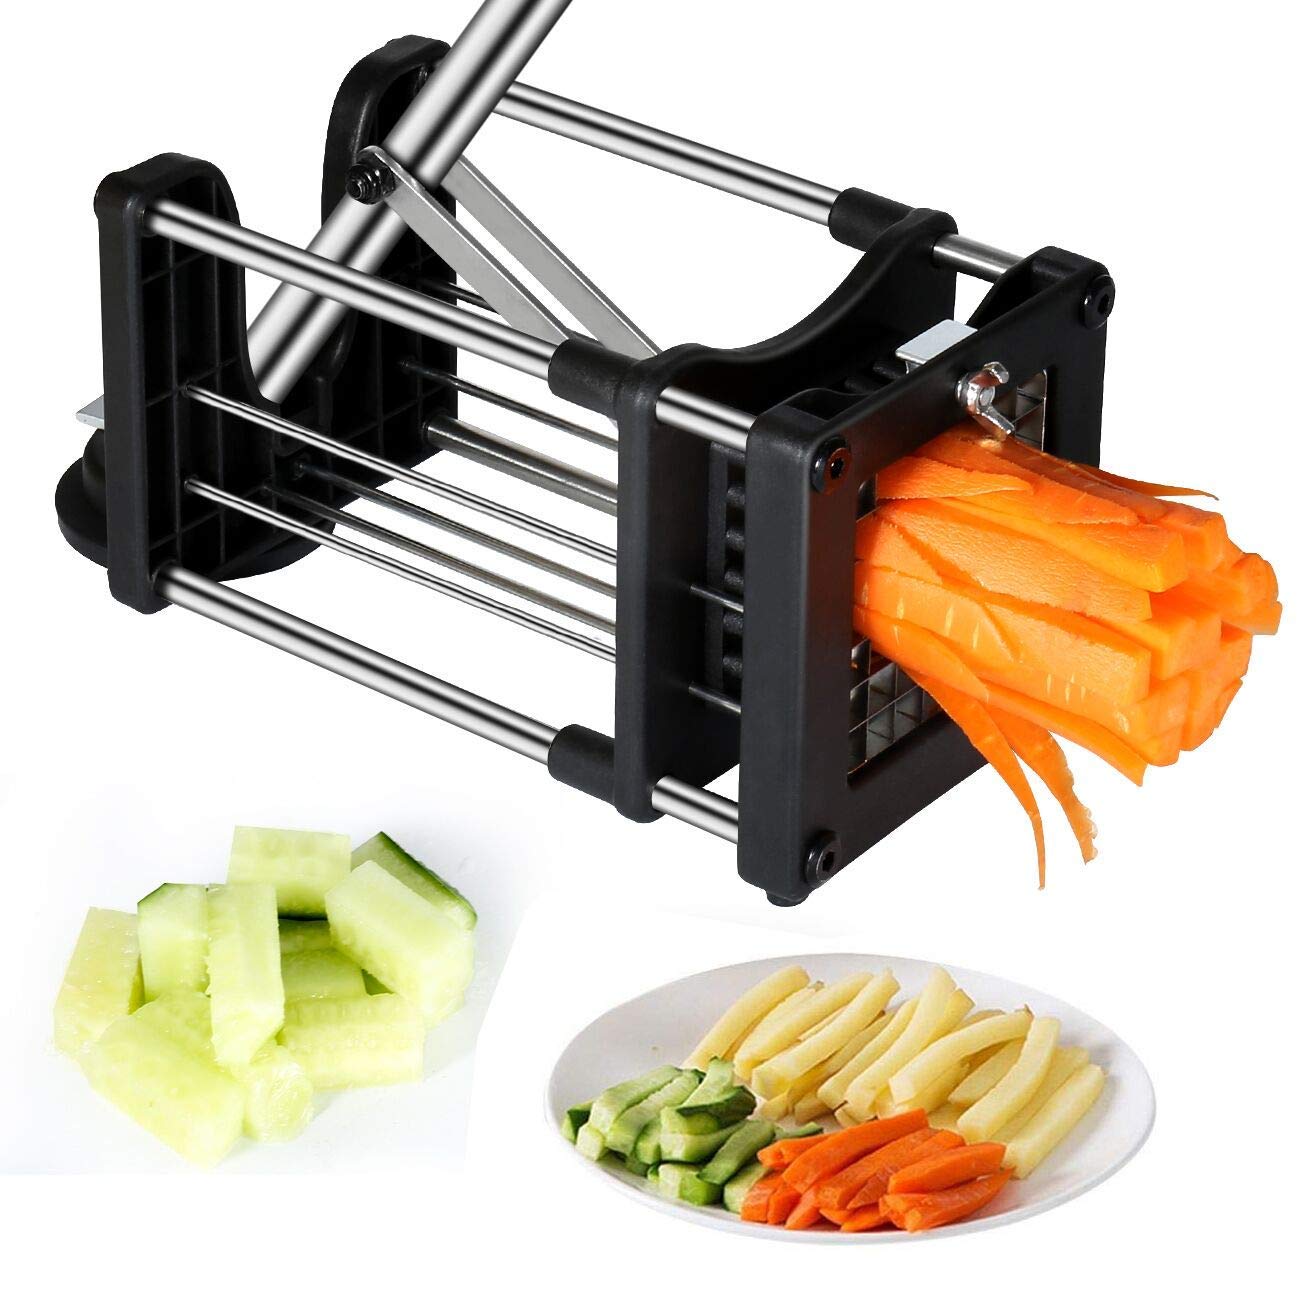  Reliatronic French Fry Cutter 